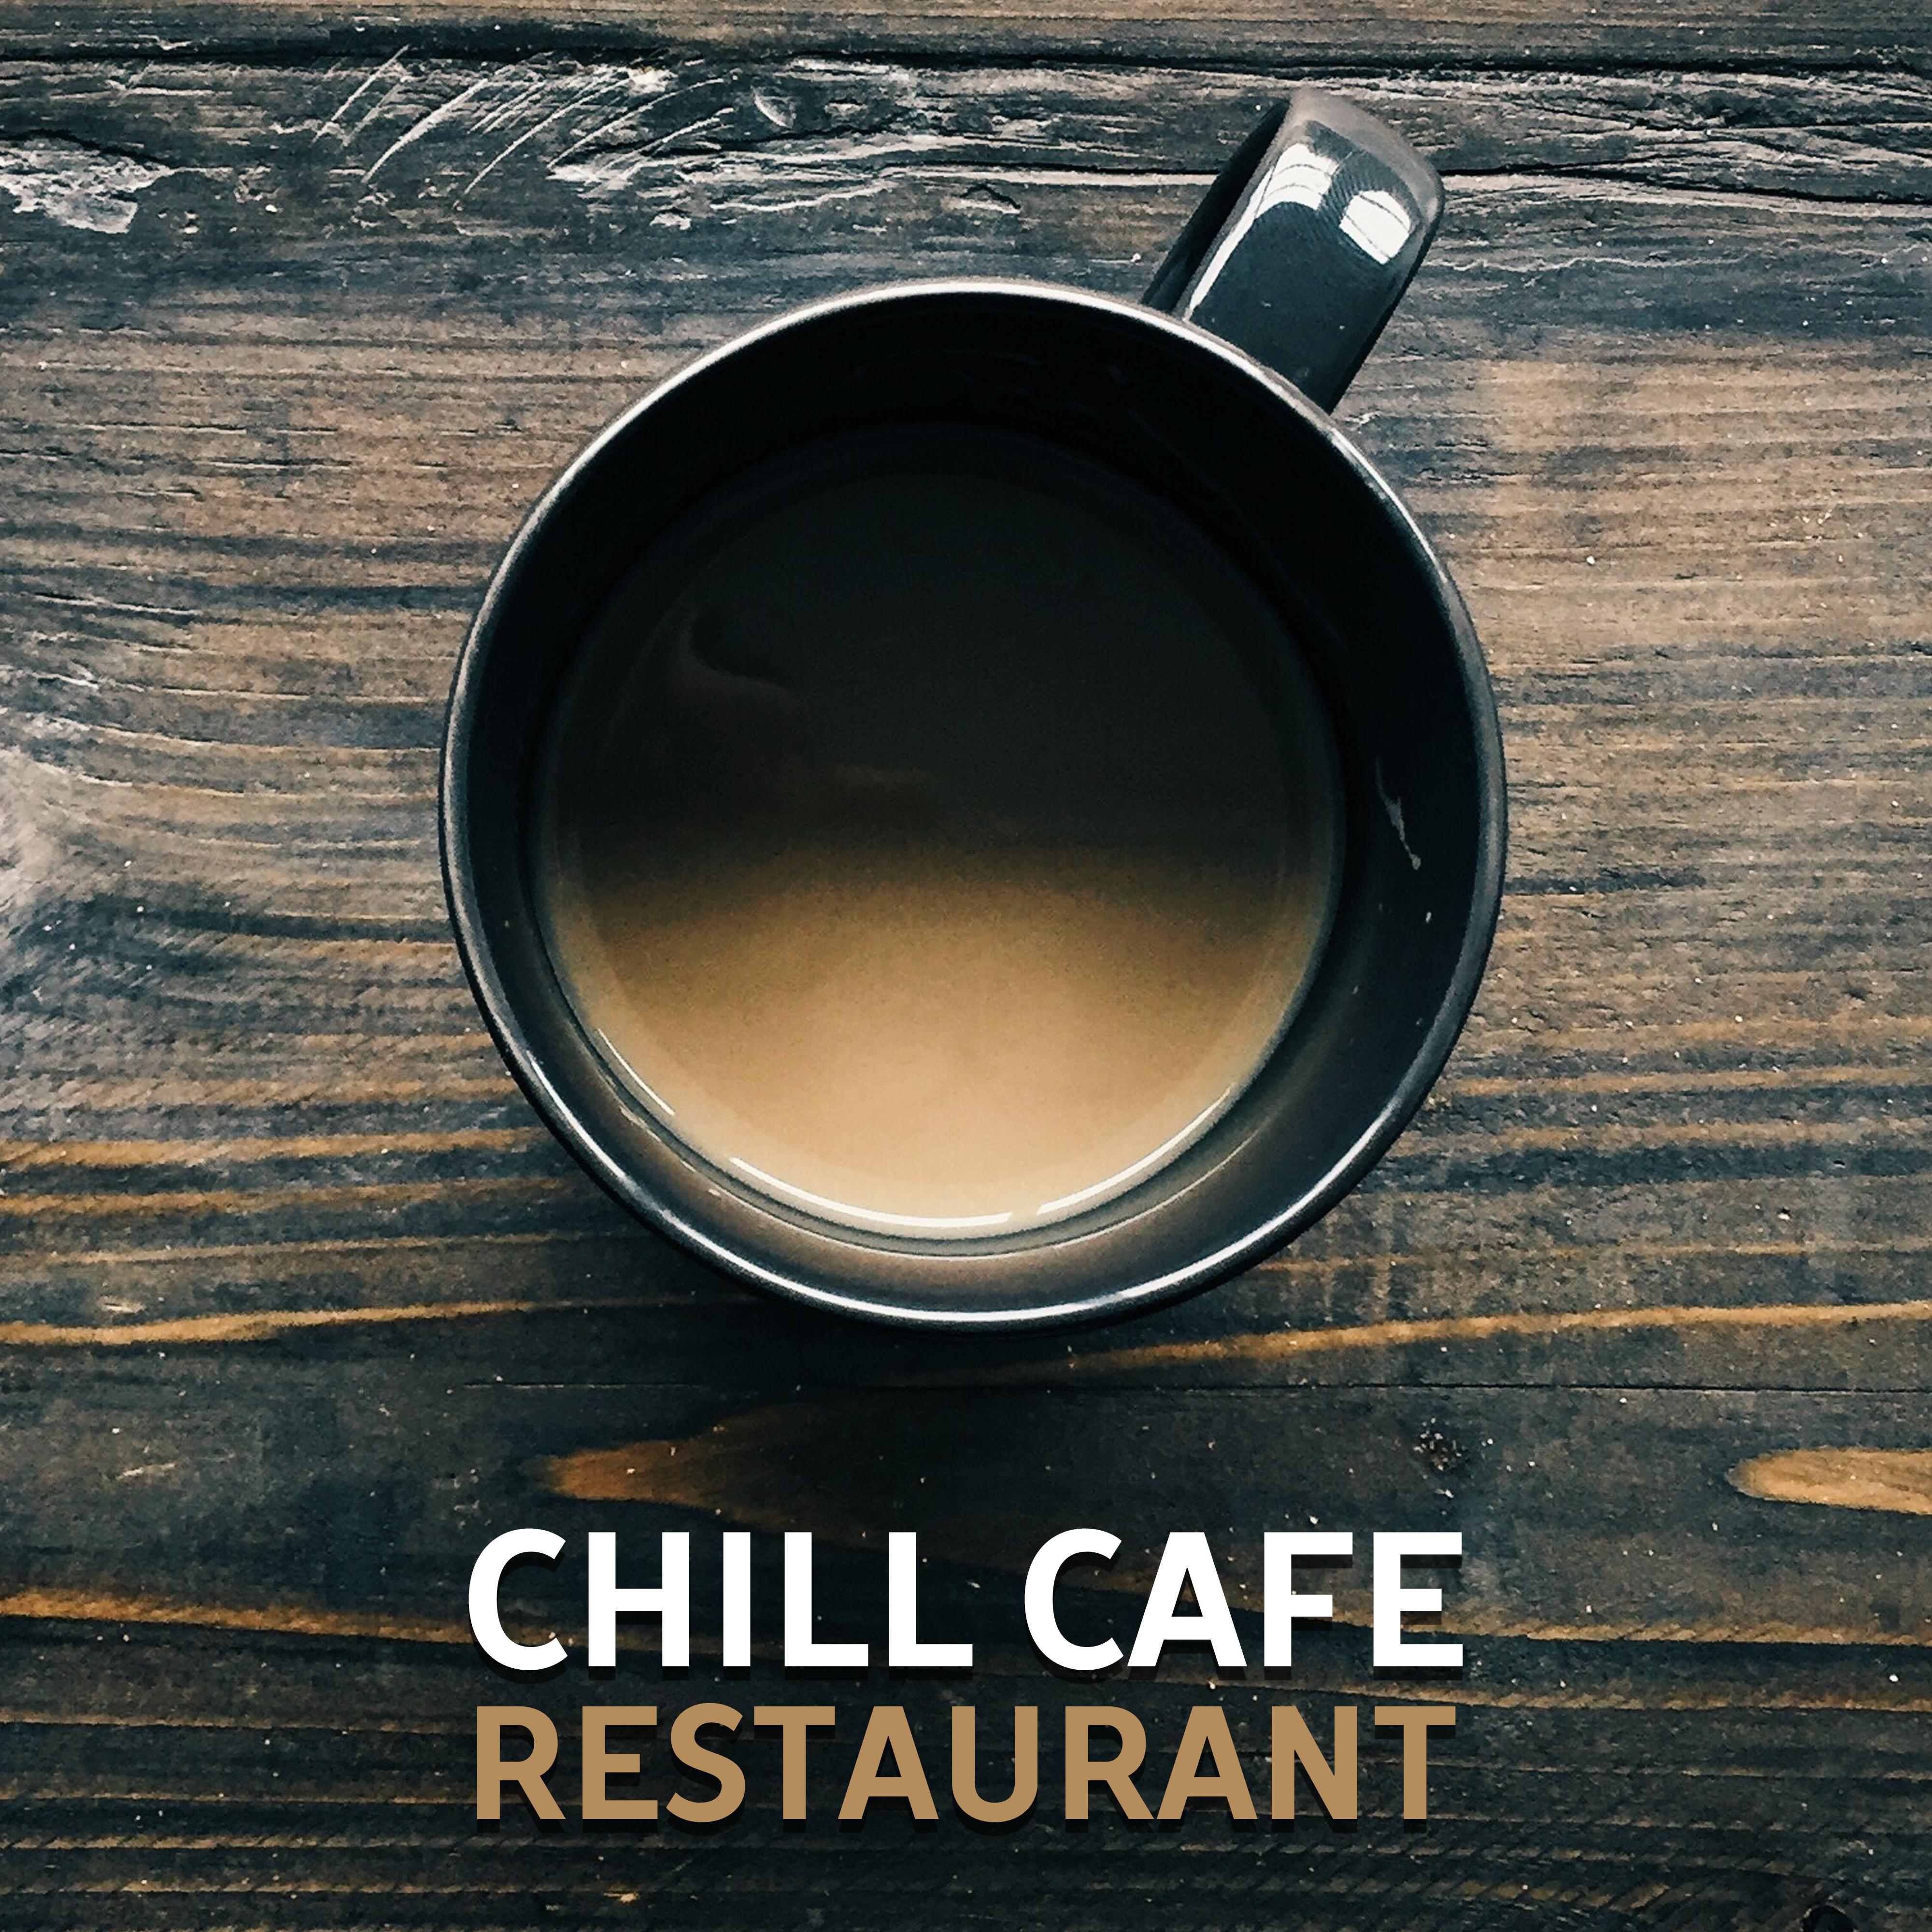 Chill Cafe Restaurant – Easy Listening, Coffee Rest, Music to Calm Down